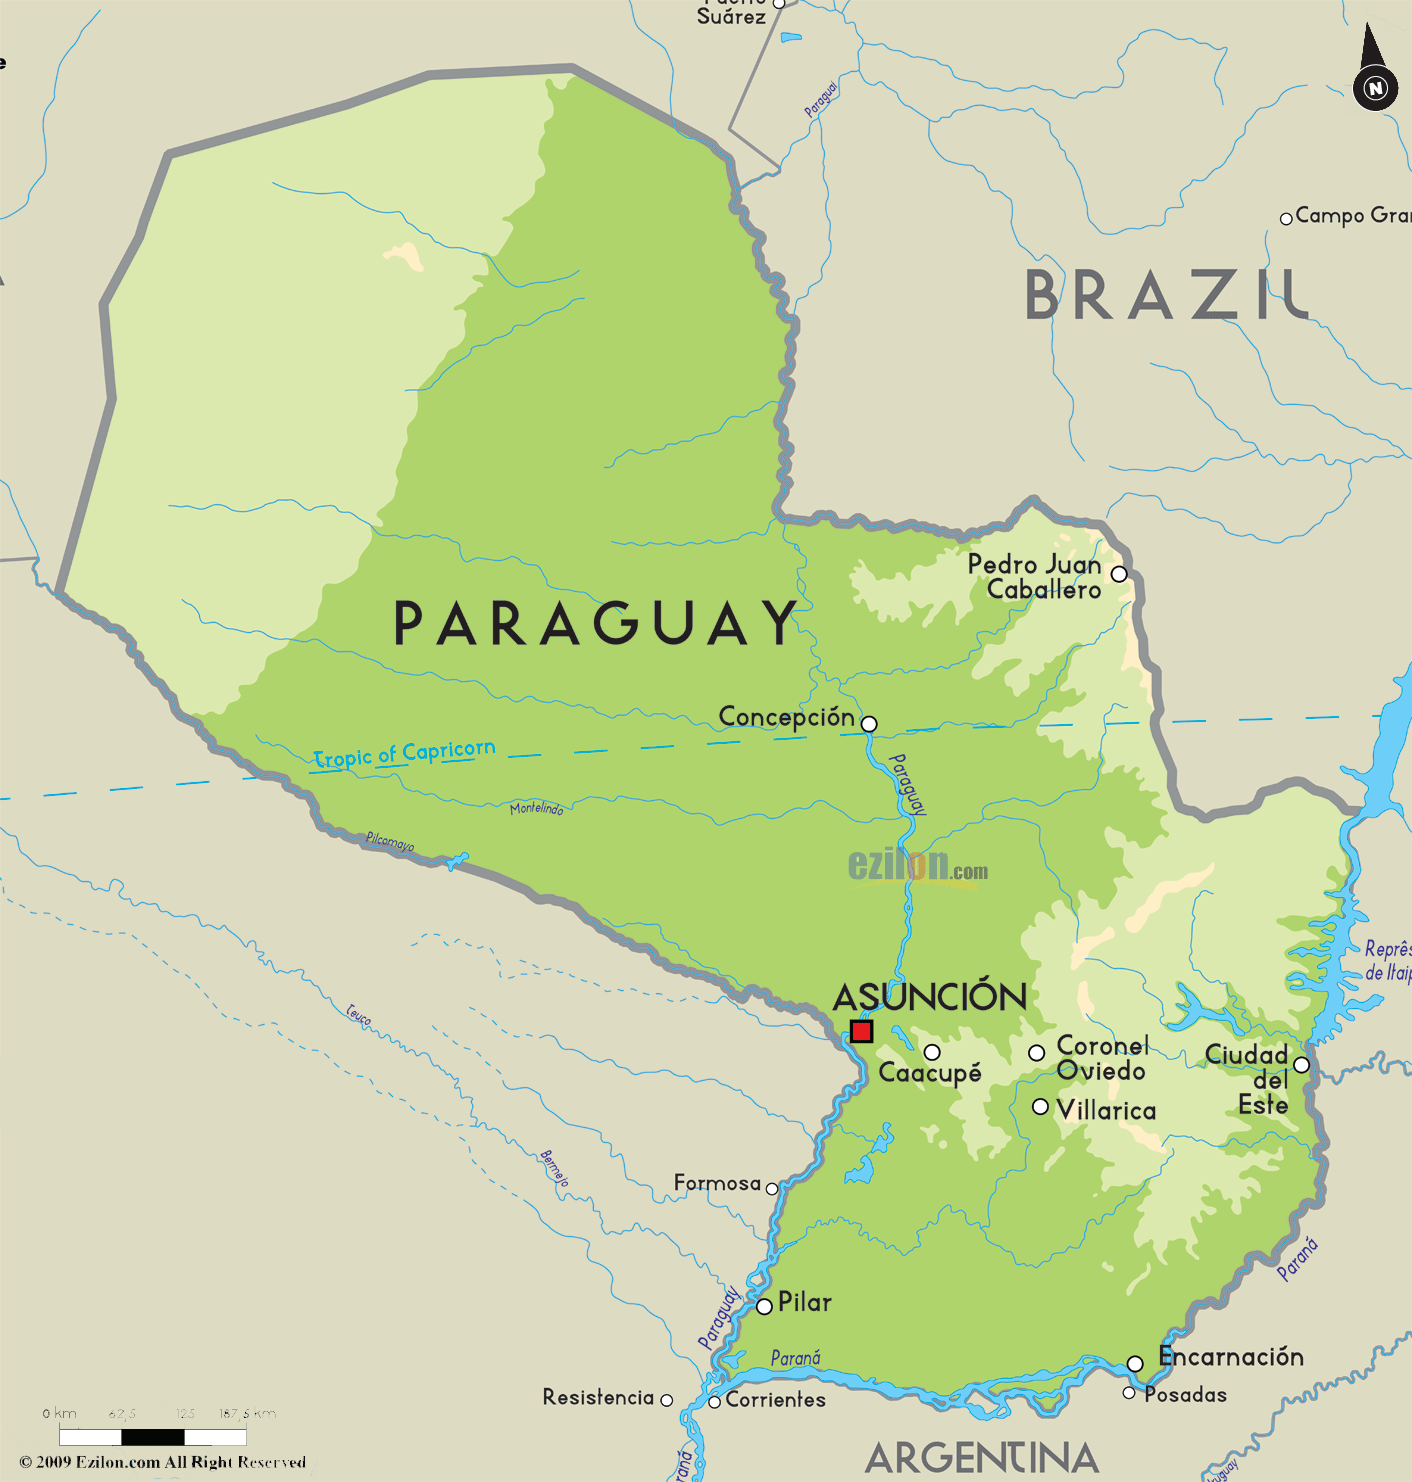 Paraguay is the second largest producer of marijuana. Mexico is first.